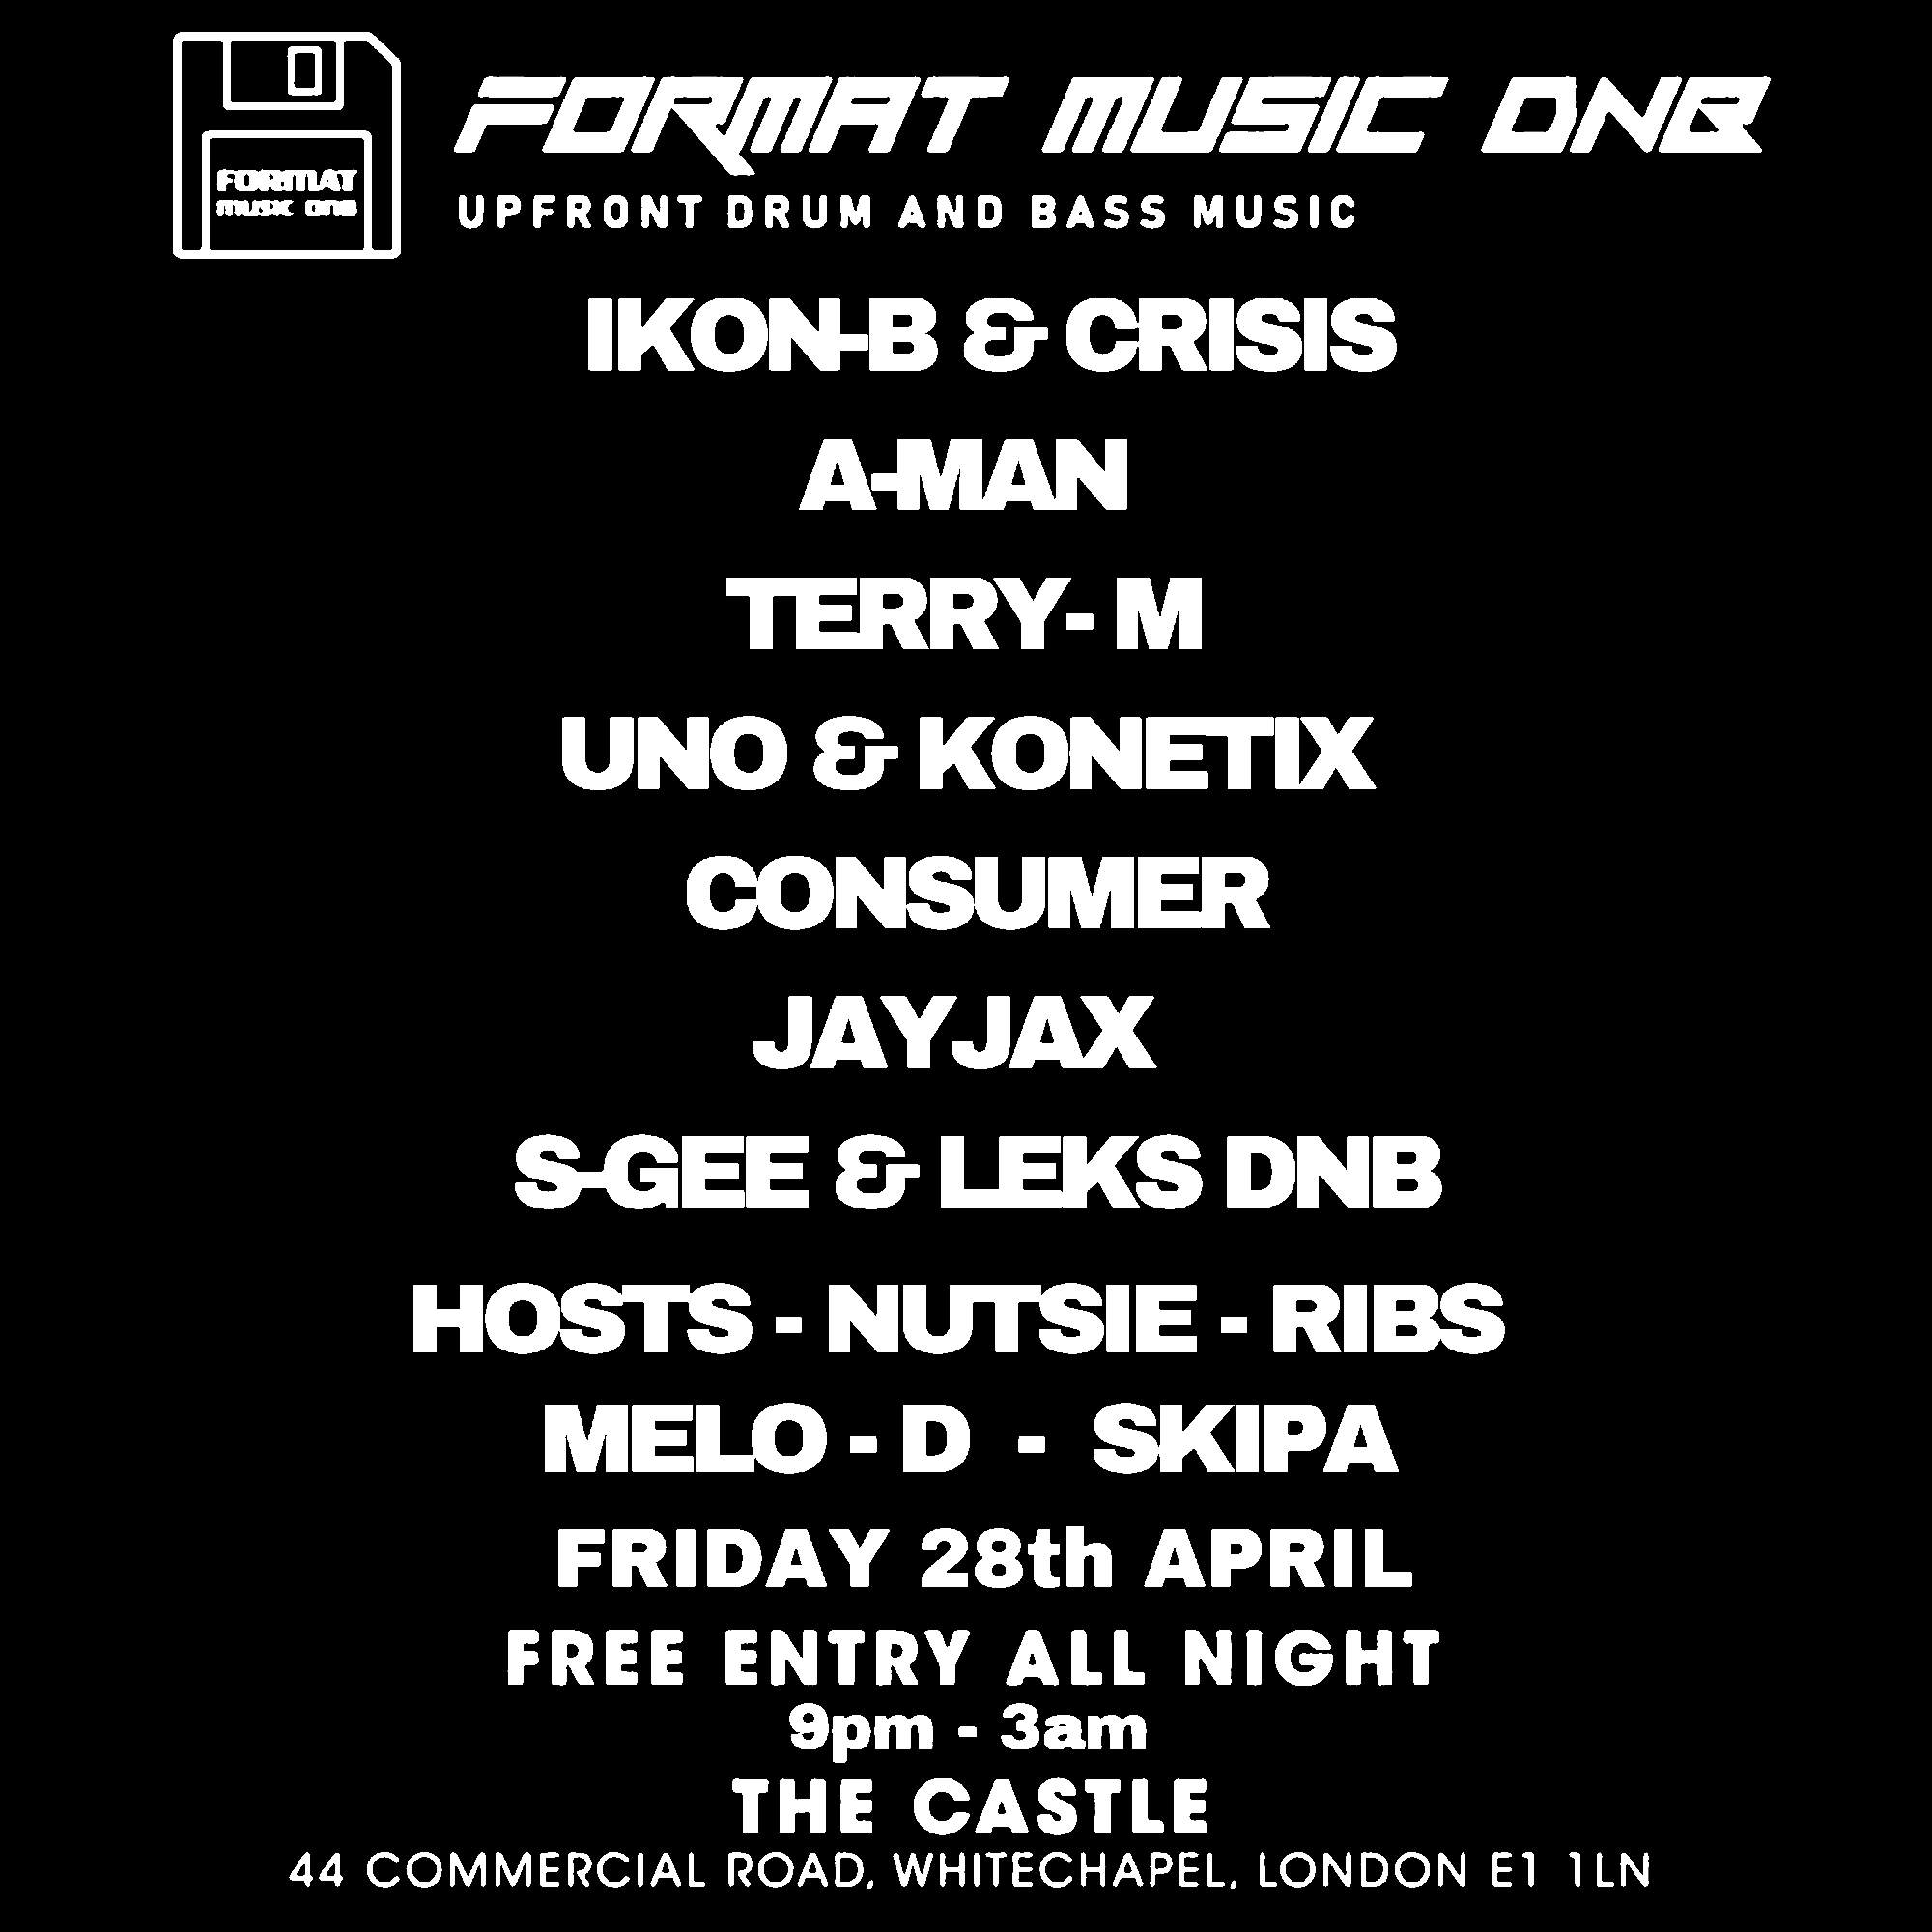 FORMAT MUSIC DNB LONDON FREE ENTRY ALL NIGHT - フライヤー表